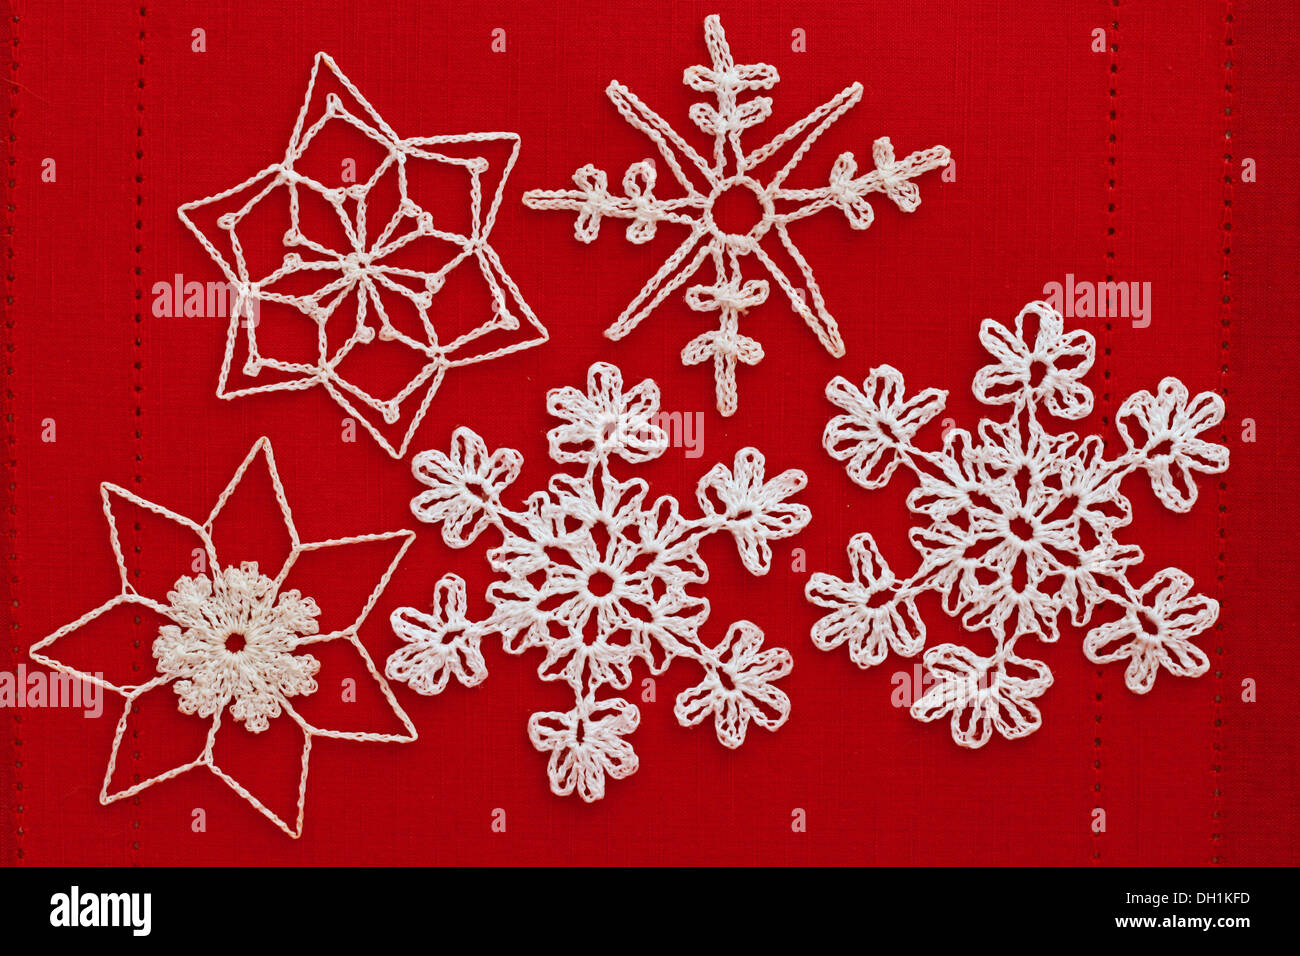 White Christmas crocheted snowflakes on a red background Stock Photo